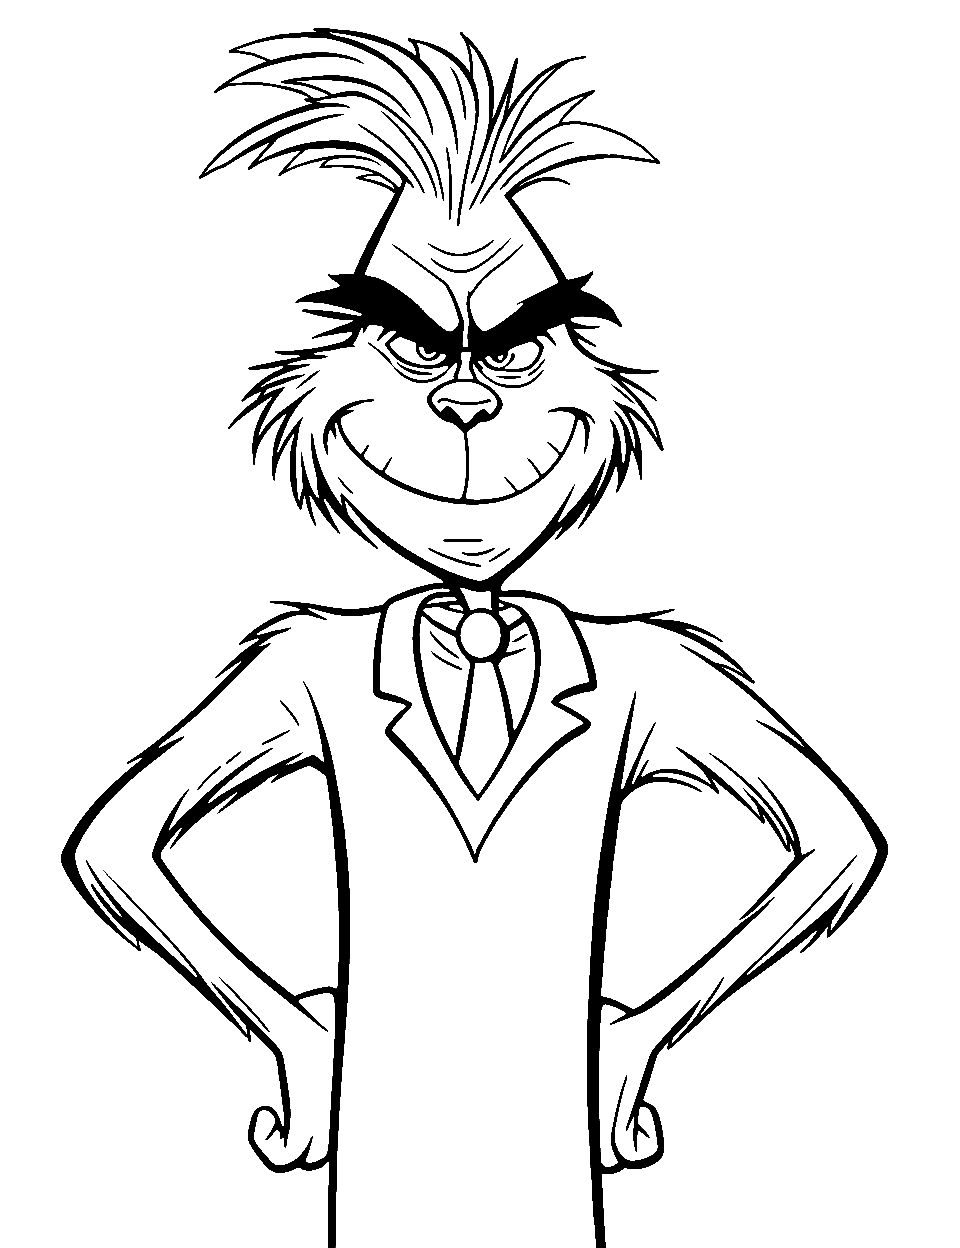 Jim Carrey’s Grinch Coloring Page - The Grinch resembling Jim Carrey’s portrayal, scowling at the viewers.